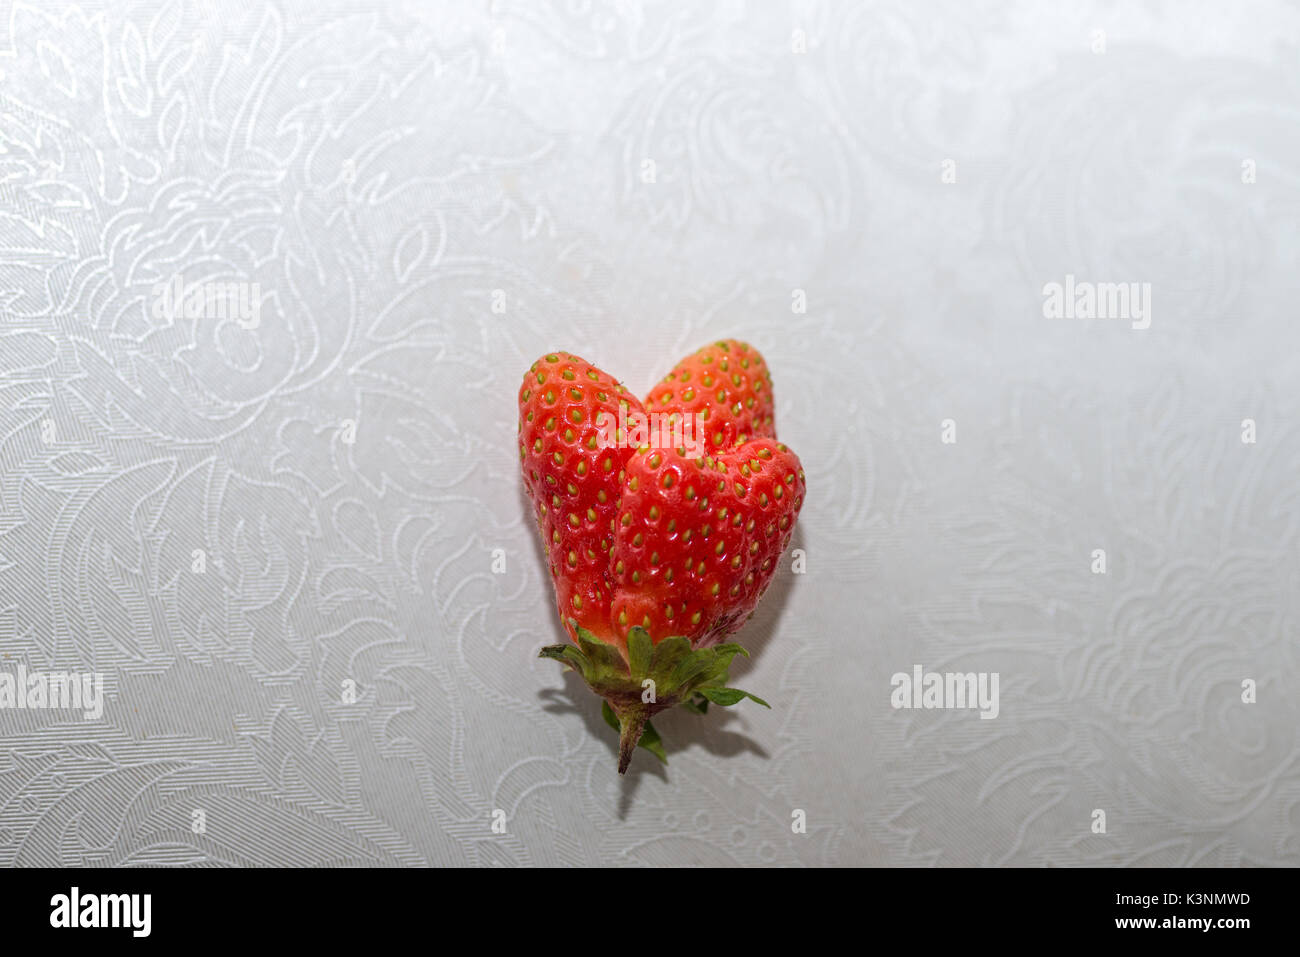 Two hearts in one strawberry Stock Photo